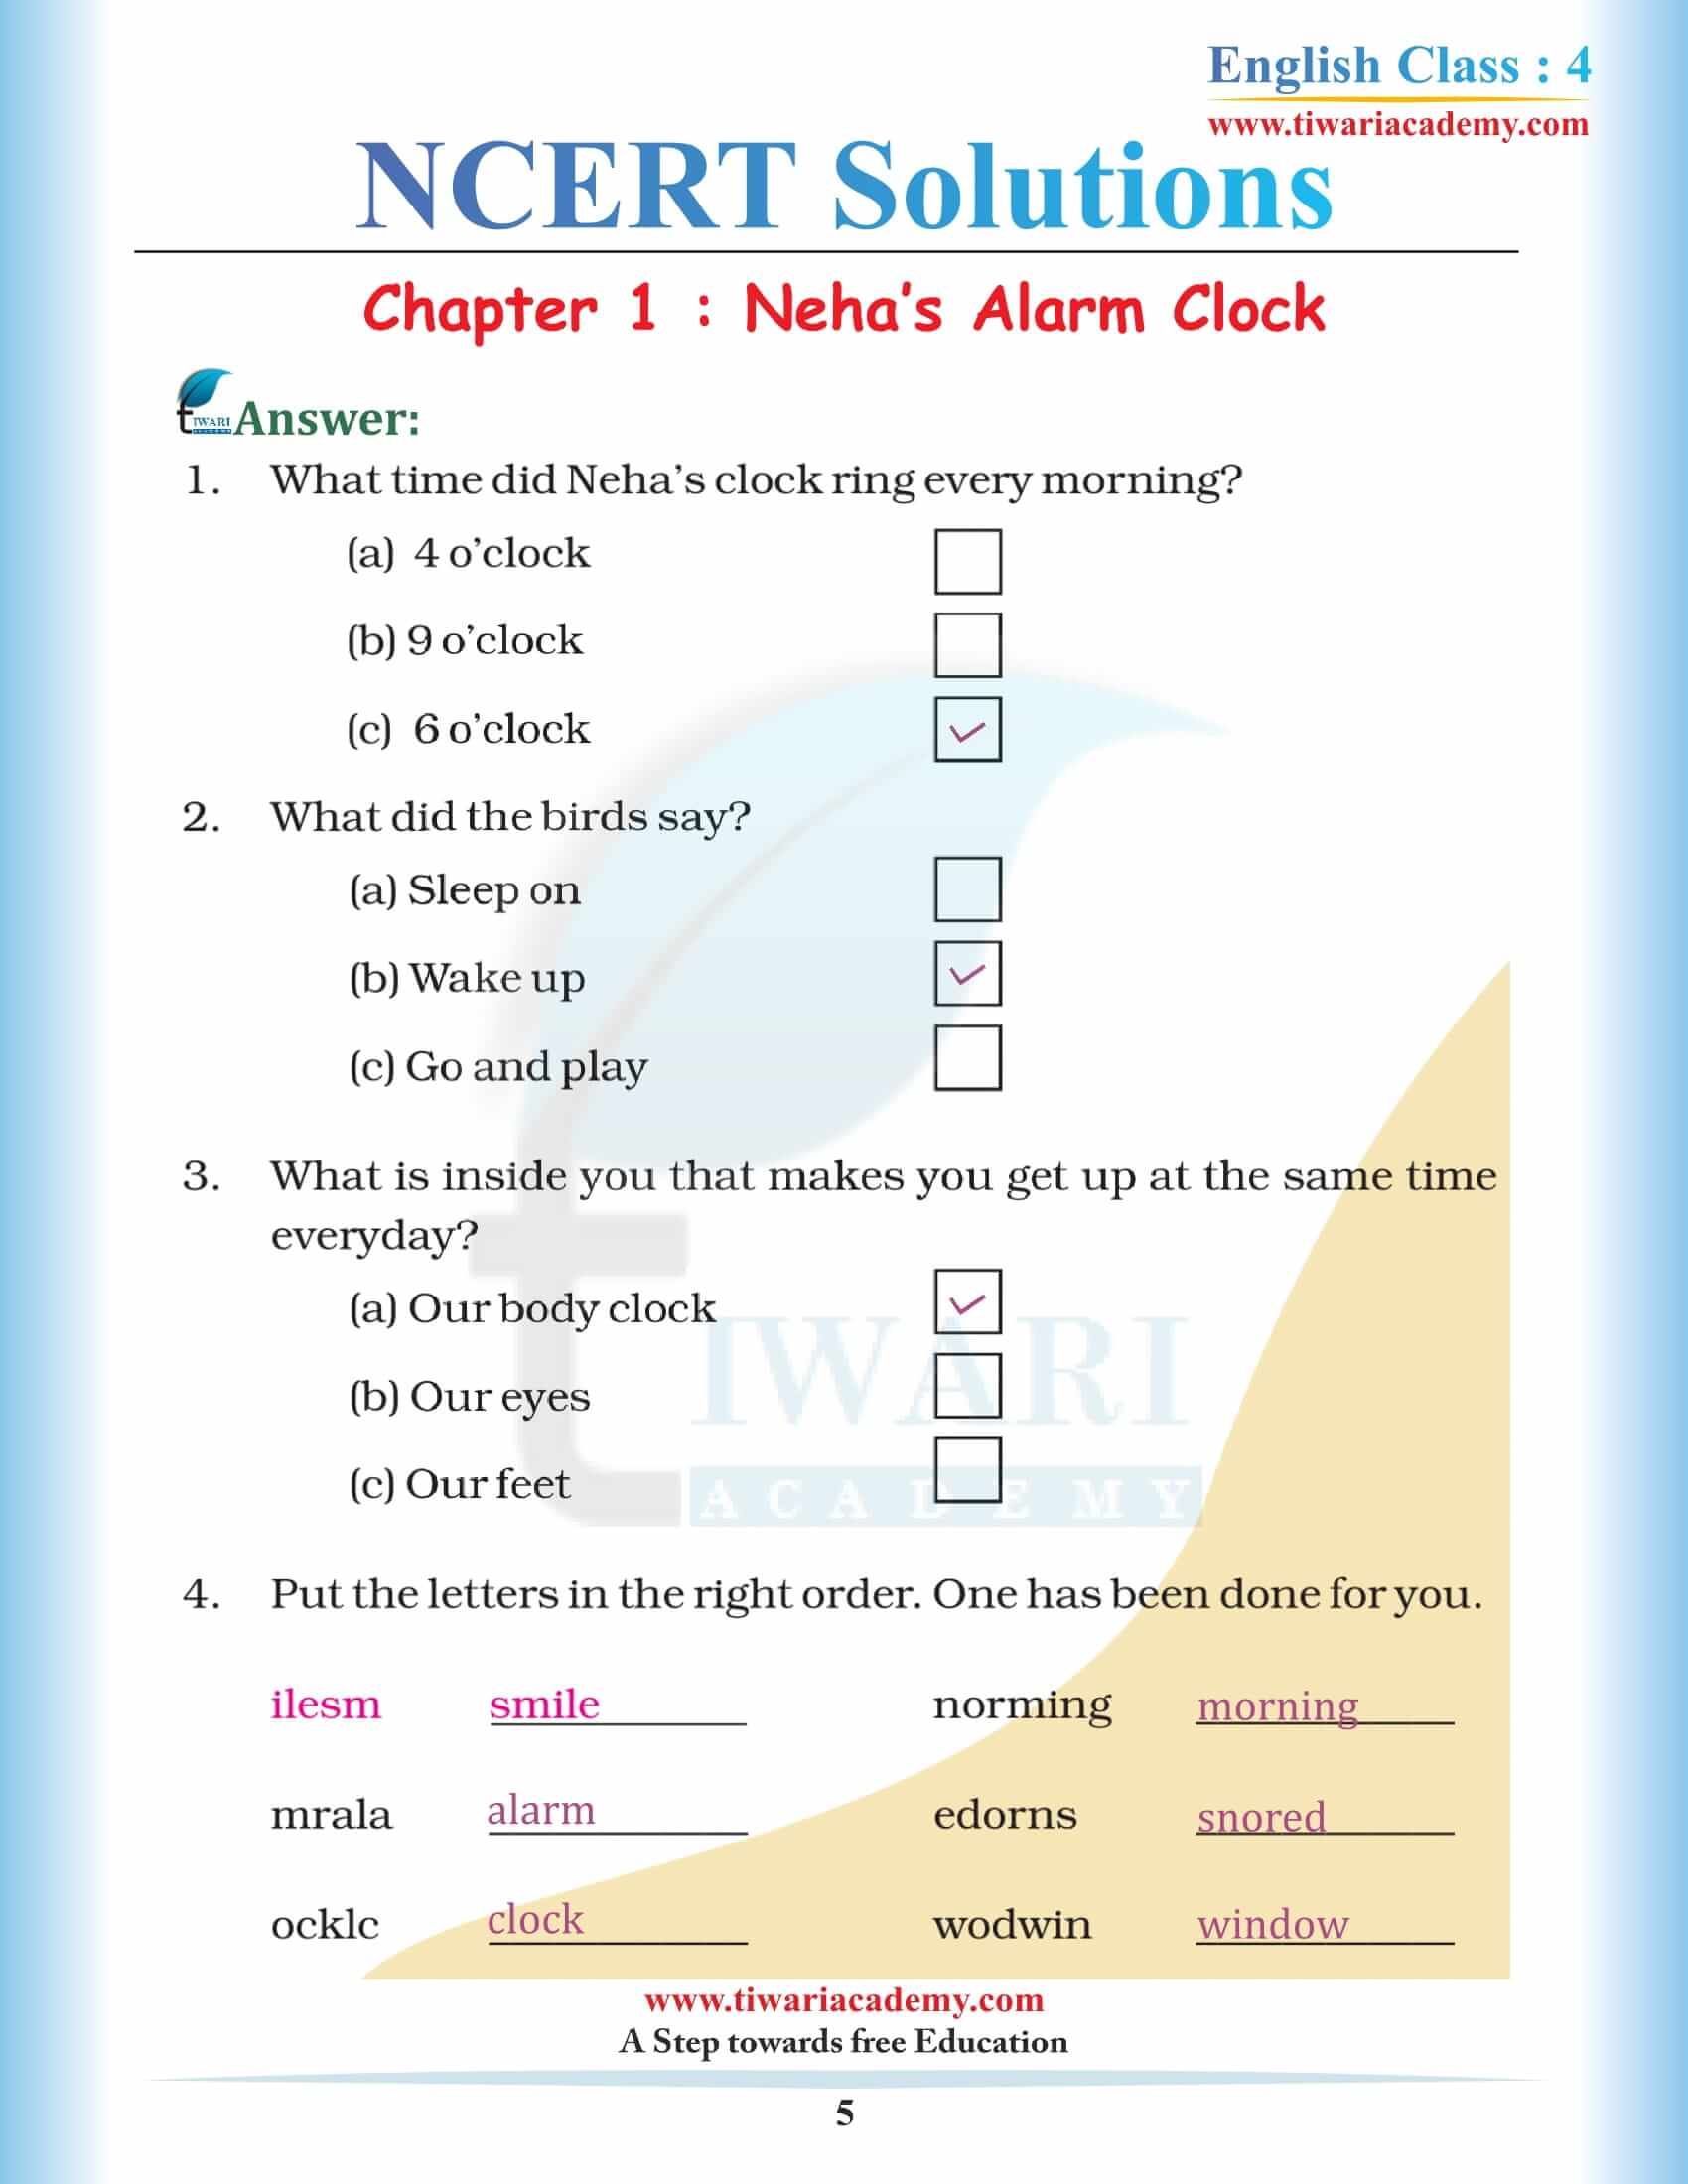 NCERT Solutions for Class 4 English Chapter 1